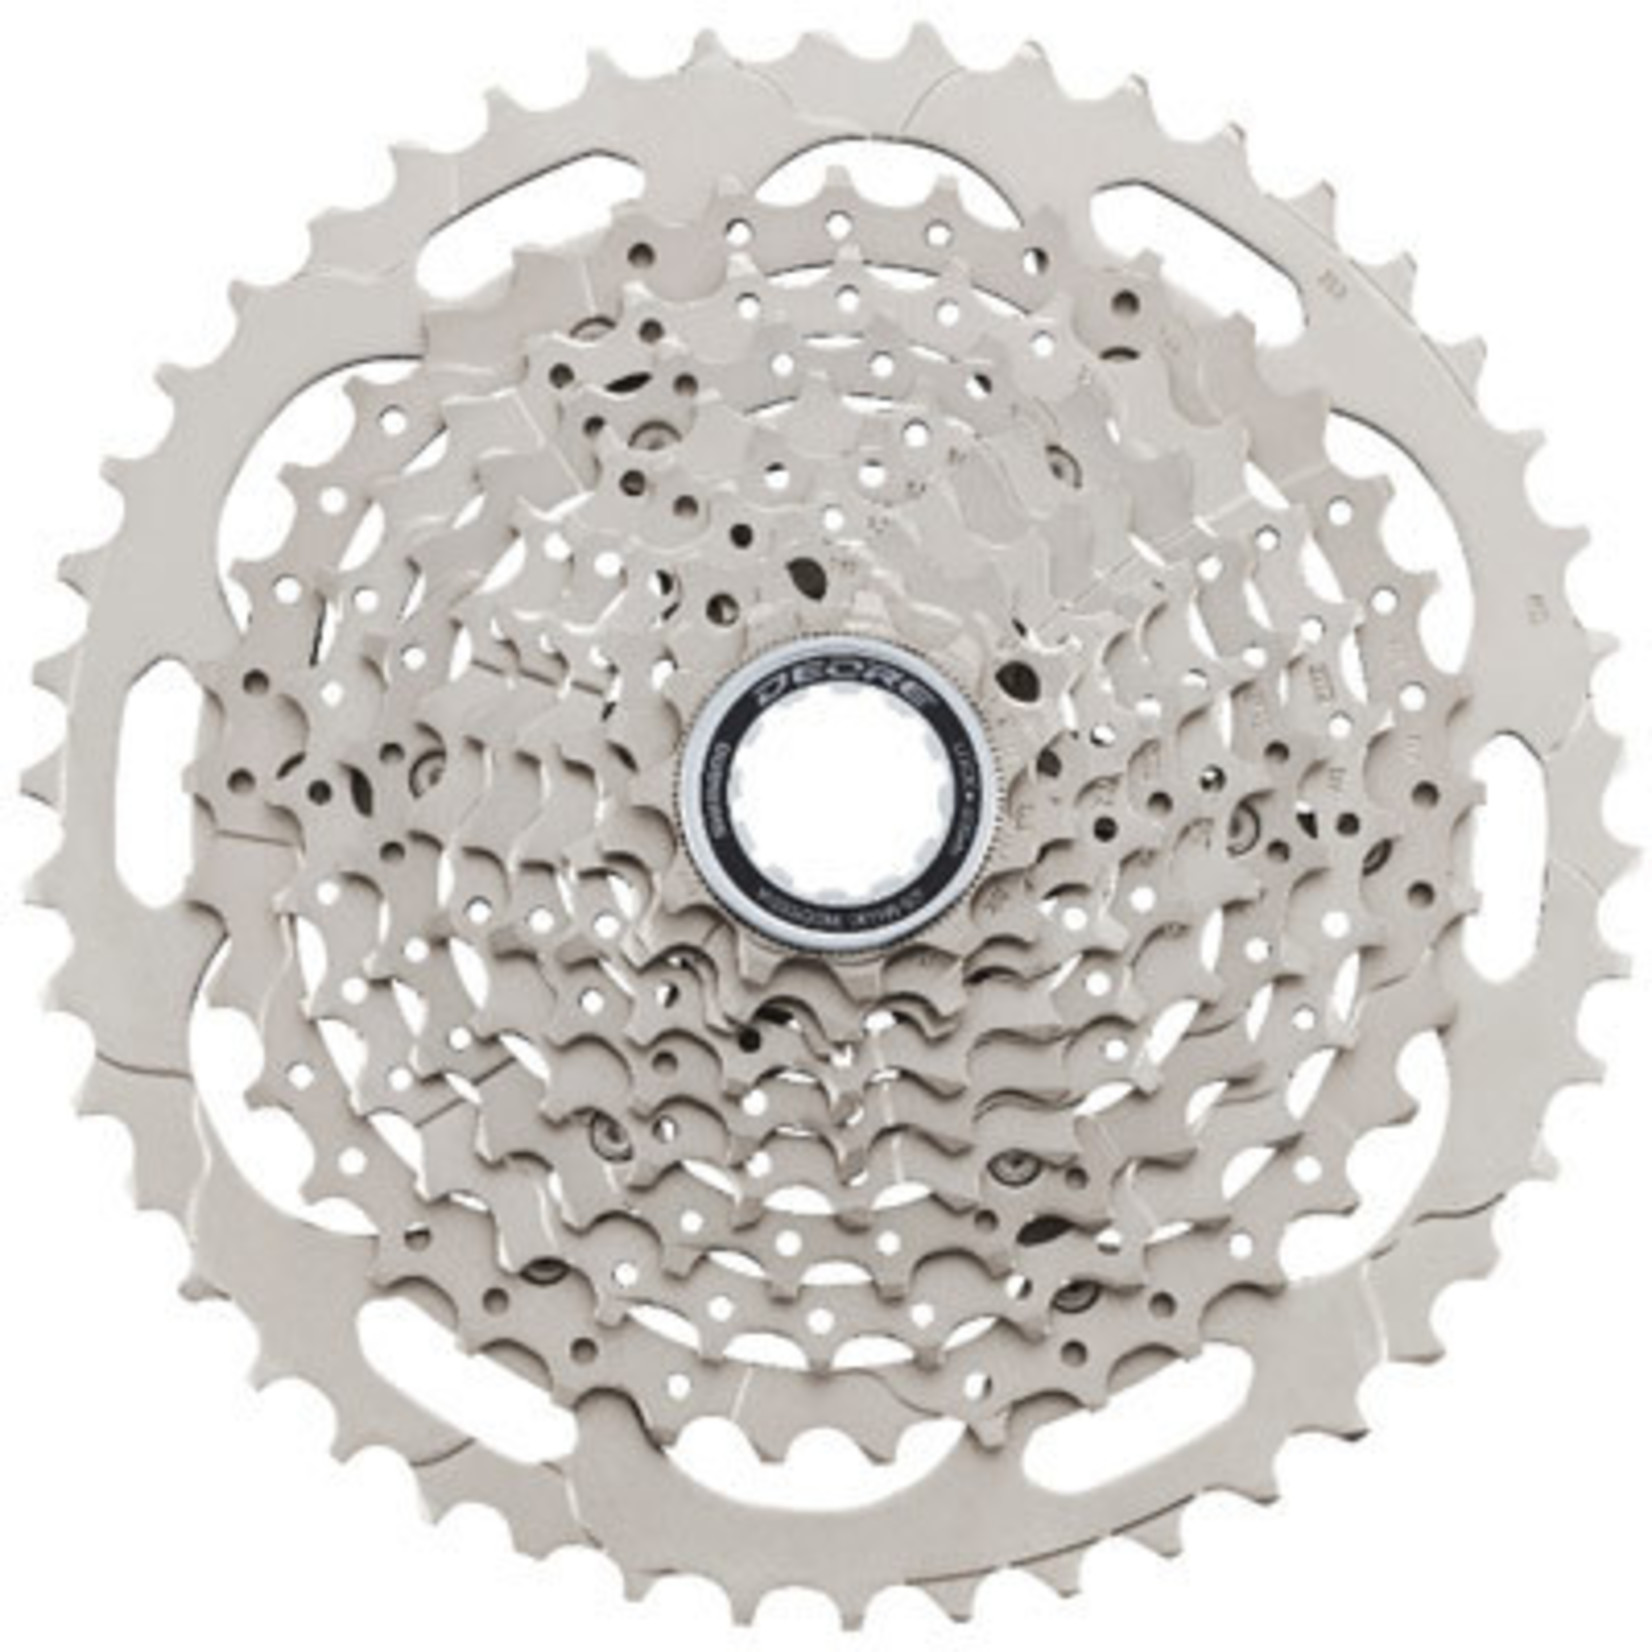 Shimano Shimano Deore CS-M4100-10 Cassette - 10-Speed, 11-46t, Silver